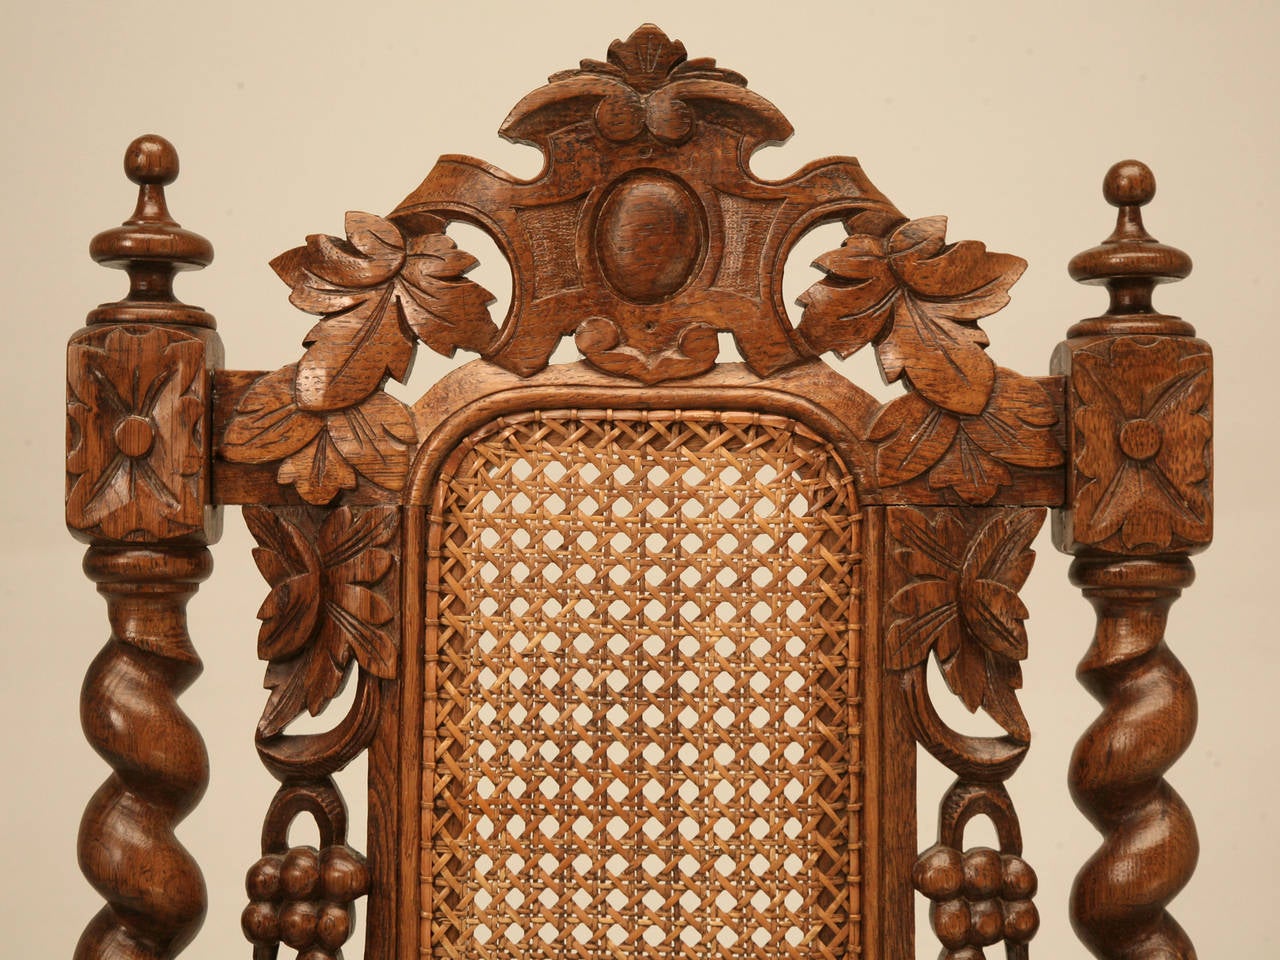 French oak barley twist side chair with a cane seat in a grape motif, circa 1890-1910. Although structurally very sound, if you look closely it is slightly out of plumb, but functions quite well.